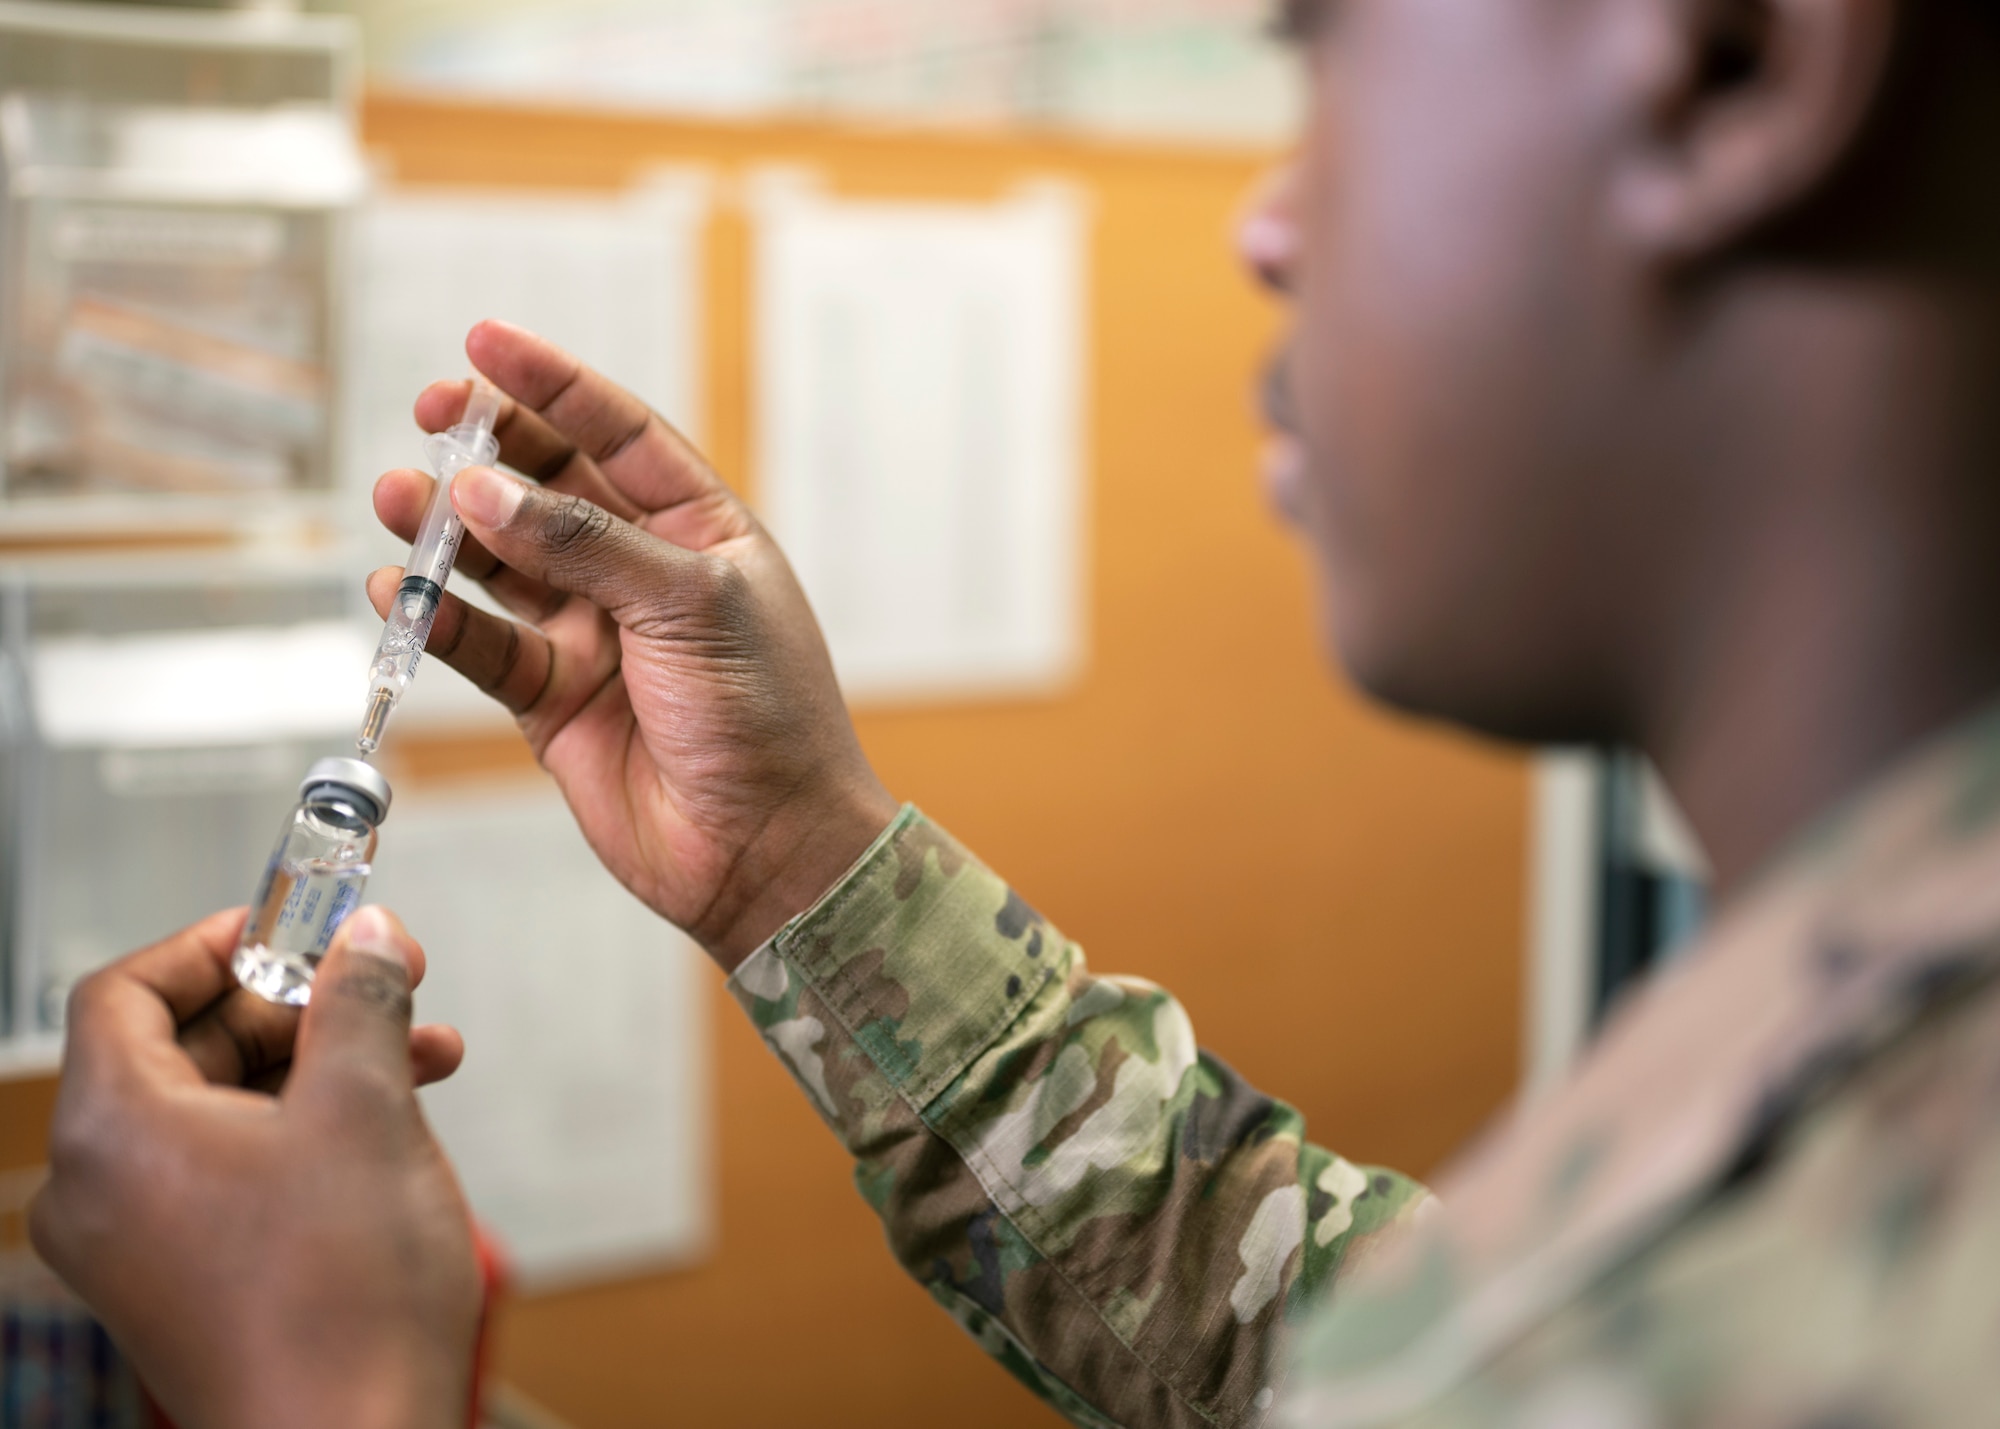 U.S. Air Force Senior Airman Micah Savage, 17th Medical Group immunizations technician, fills a syringe with saline as a part of his demonstration at the Ross Clinic on Goodfellow Air Force Base, Texas, April 19, 2021. Savage was in charge of ensuring vaccines were administered safely and correctly to all immunizations patients. (U.S. Air Force photo by Airman 1st Class Michael Bowman)